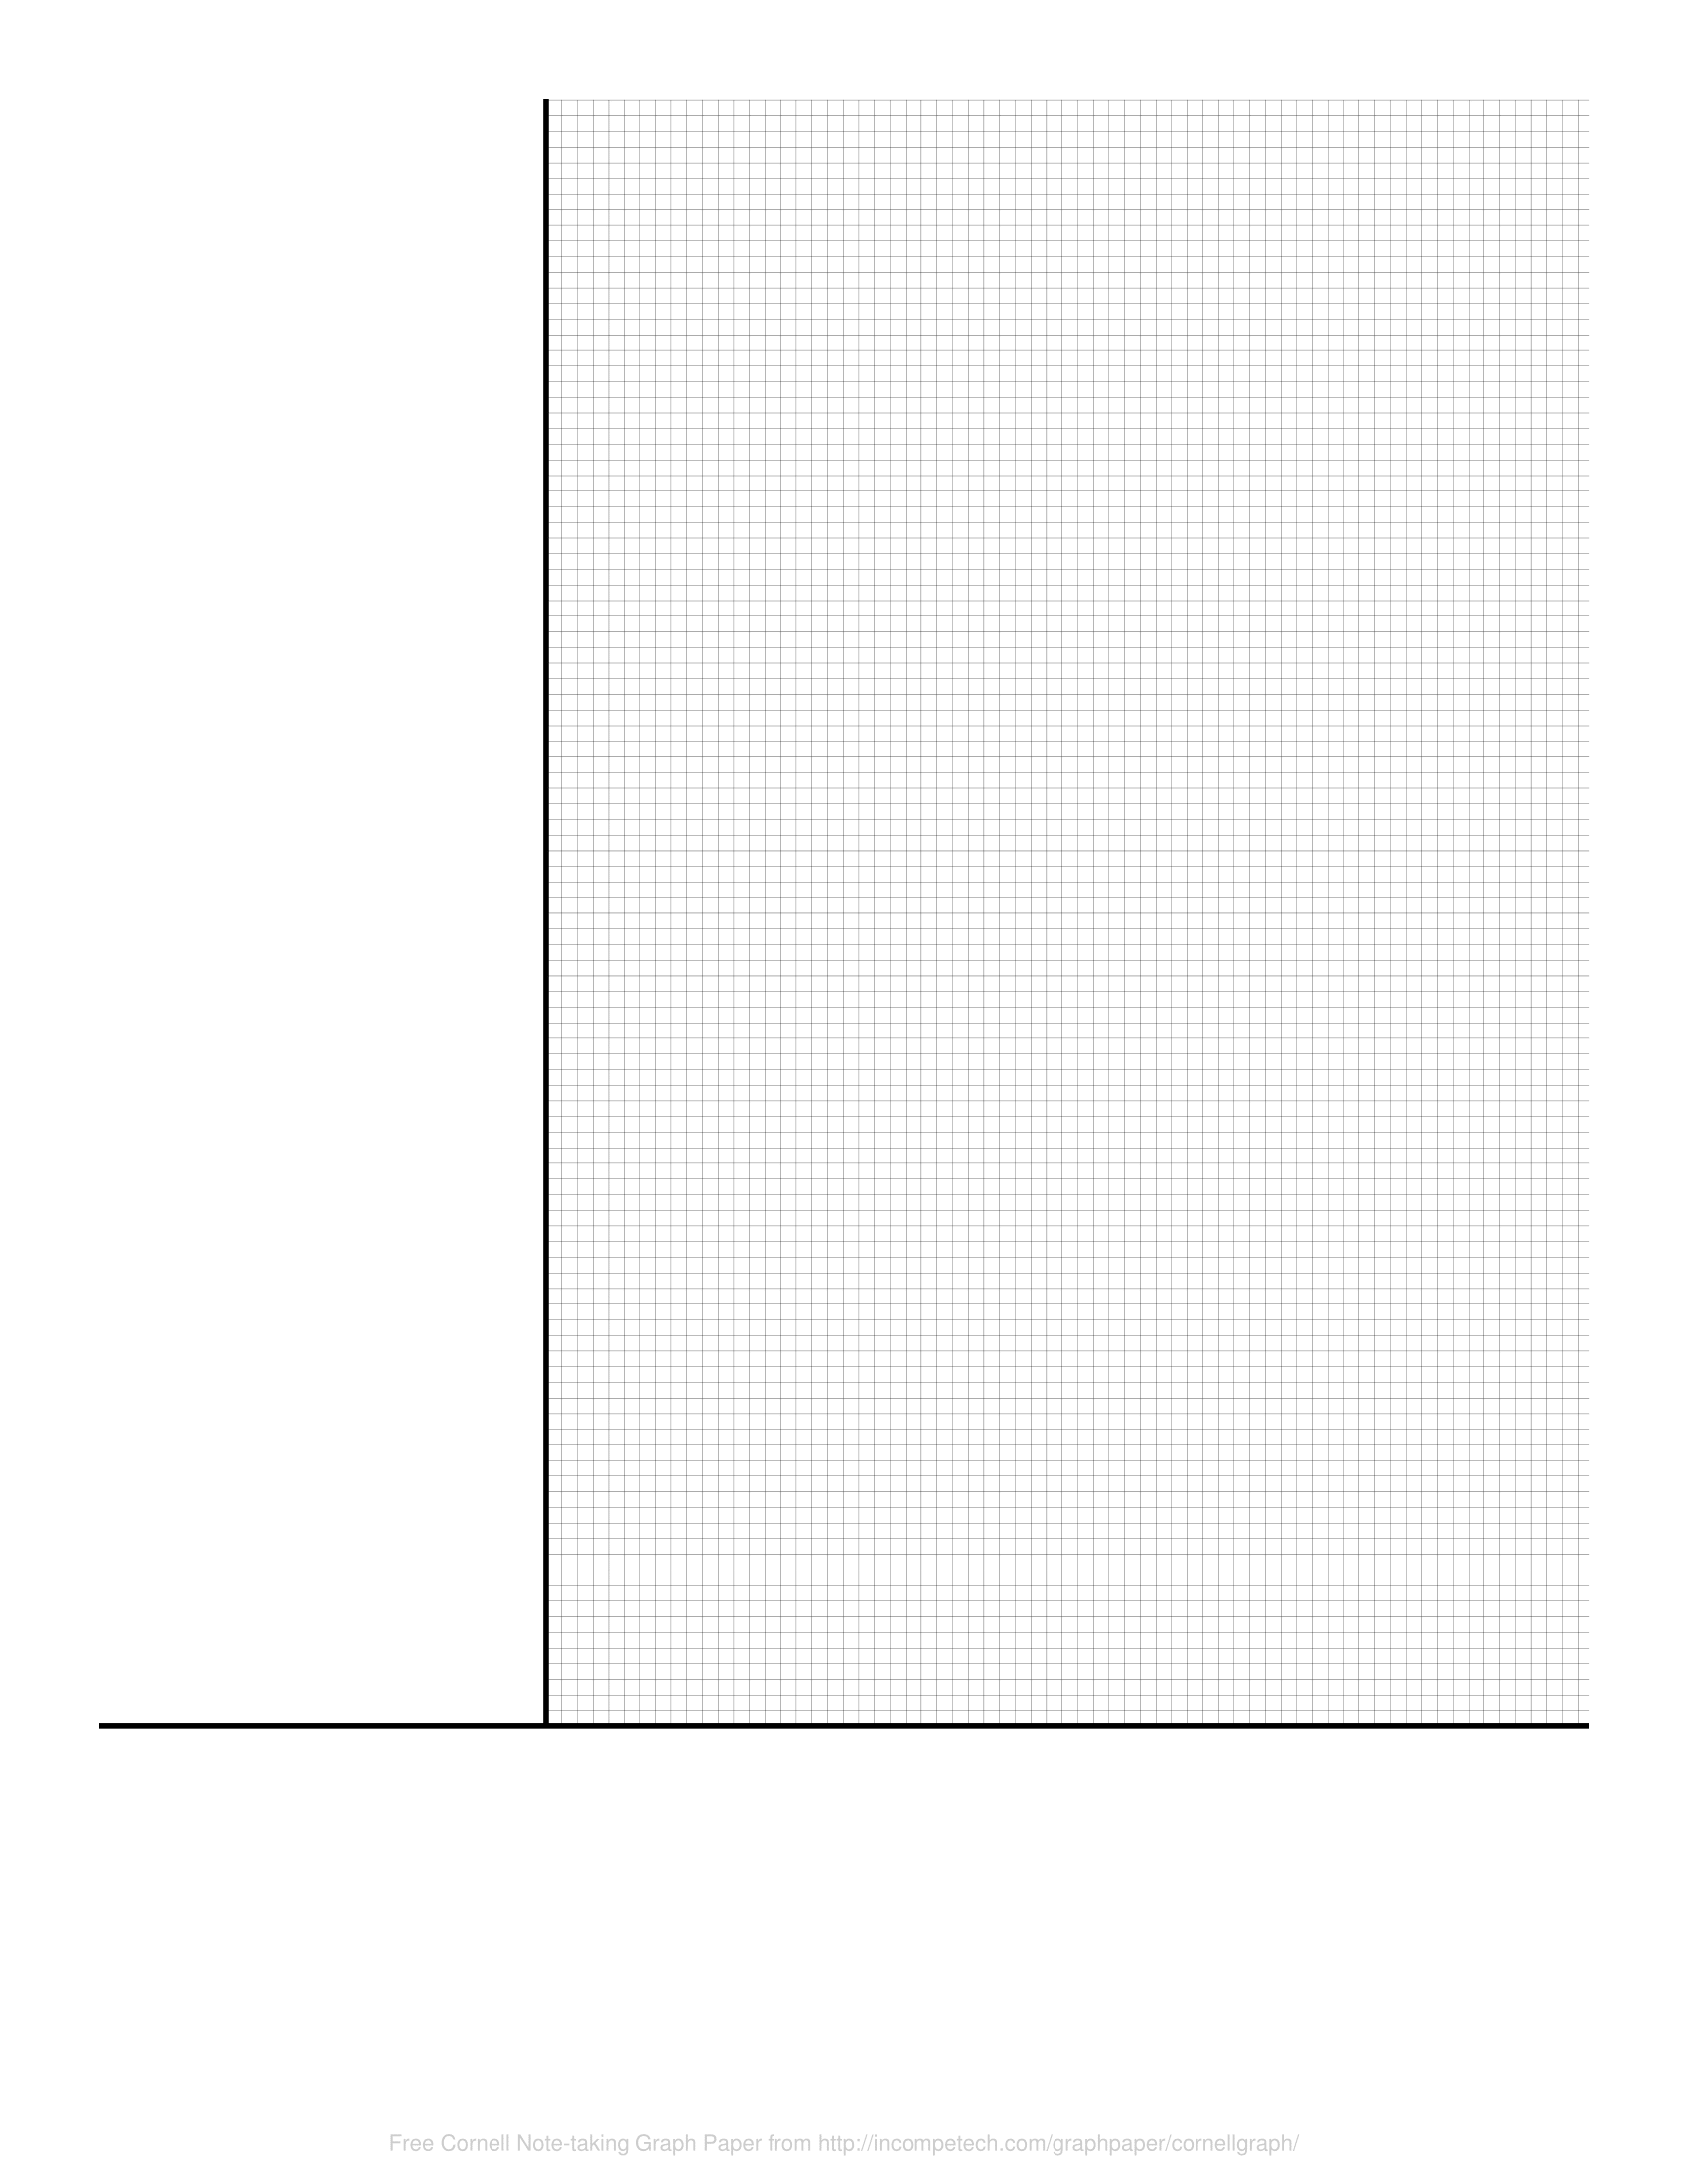 Free Online Graph Paper Cornell Note taking Graph